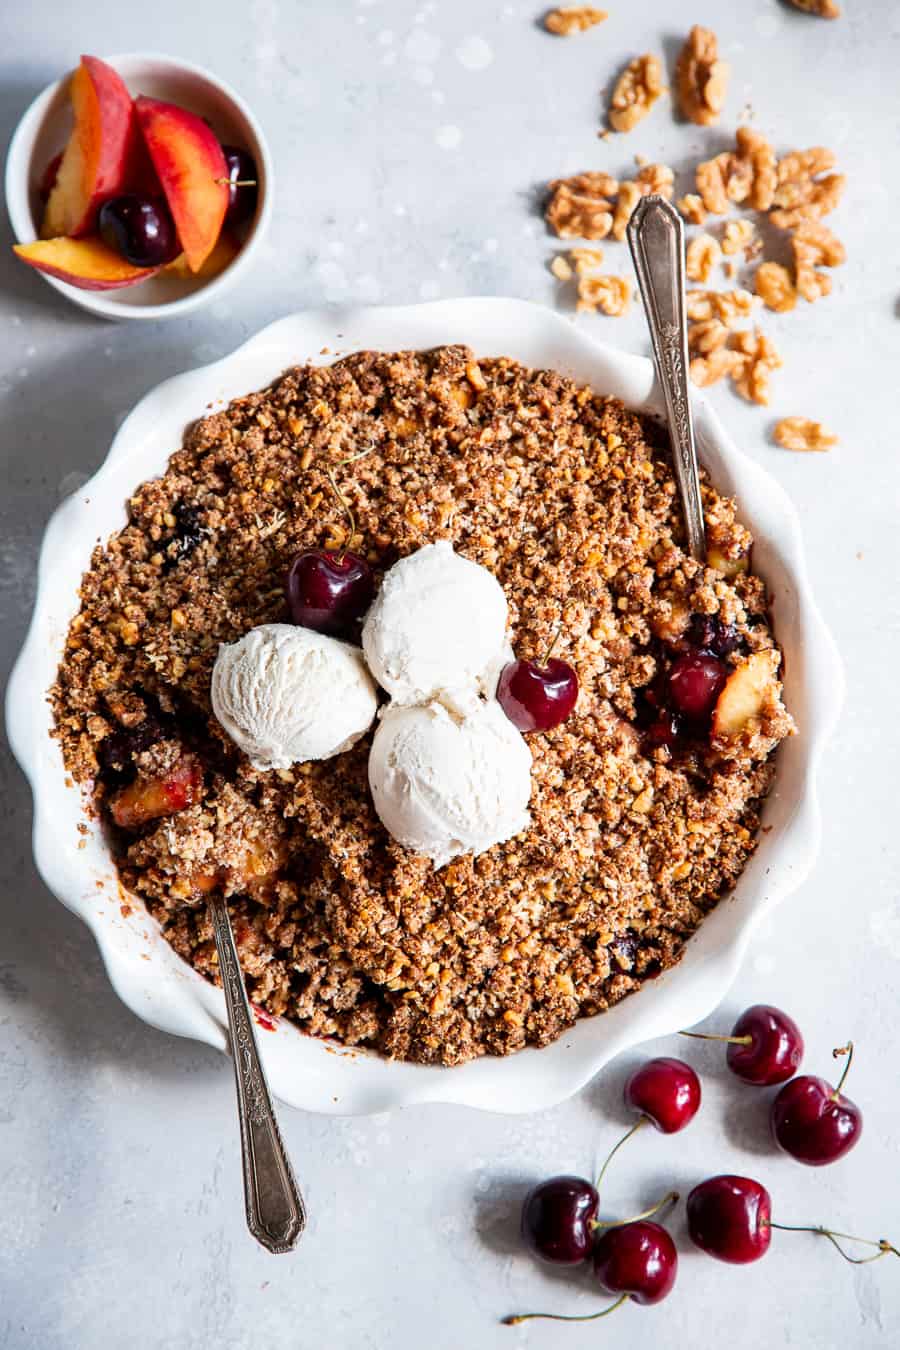 This cherry and peach crisp is irresistibly delicious and easy to make!  A sweet gooey peach and cherry filling is topped with a toasty crumble for a summer dessert that will make everyone come back for seconds.  It’s paleo, vegan, gluten-free, dairy-free and refined sugar free. #vegan #paleo #cleaneating #paleodessert